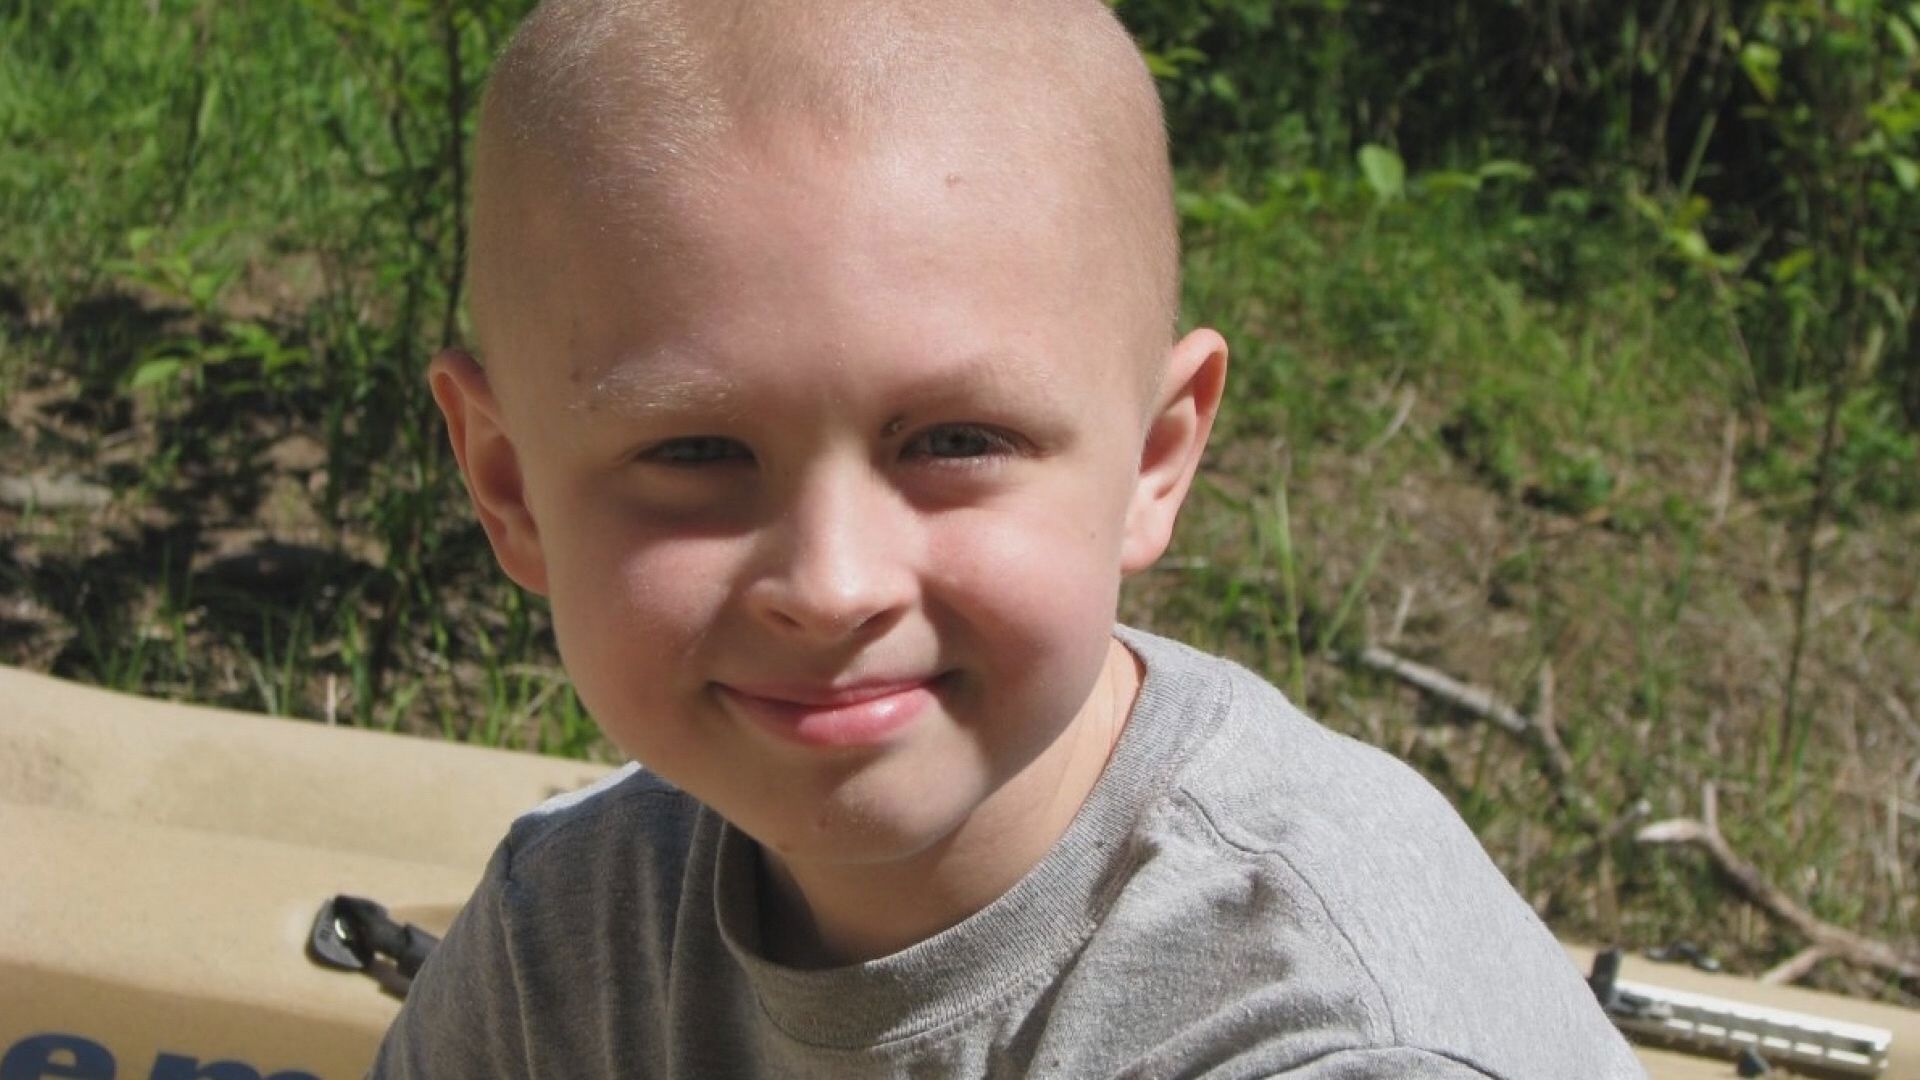 Lorna Day created the Sam Day Foundation after her son was diagnosed with Ewing sarcoma at 9 years old. The foundation is holding their annual Buddy Run Saturday.